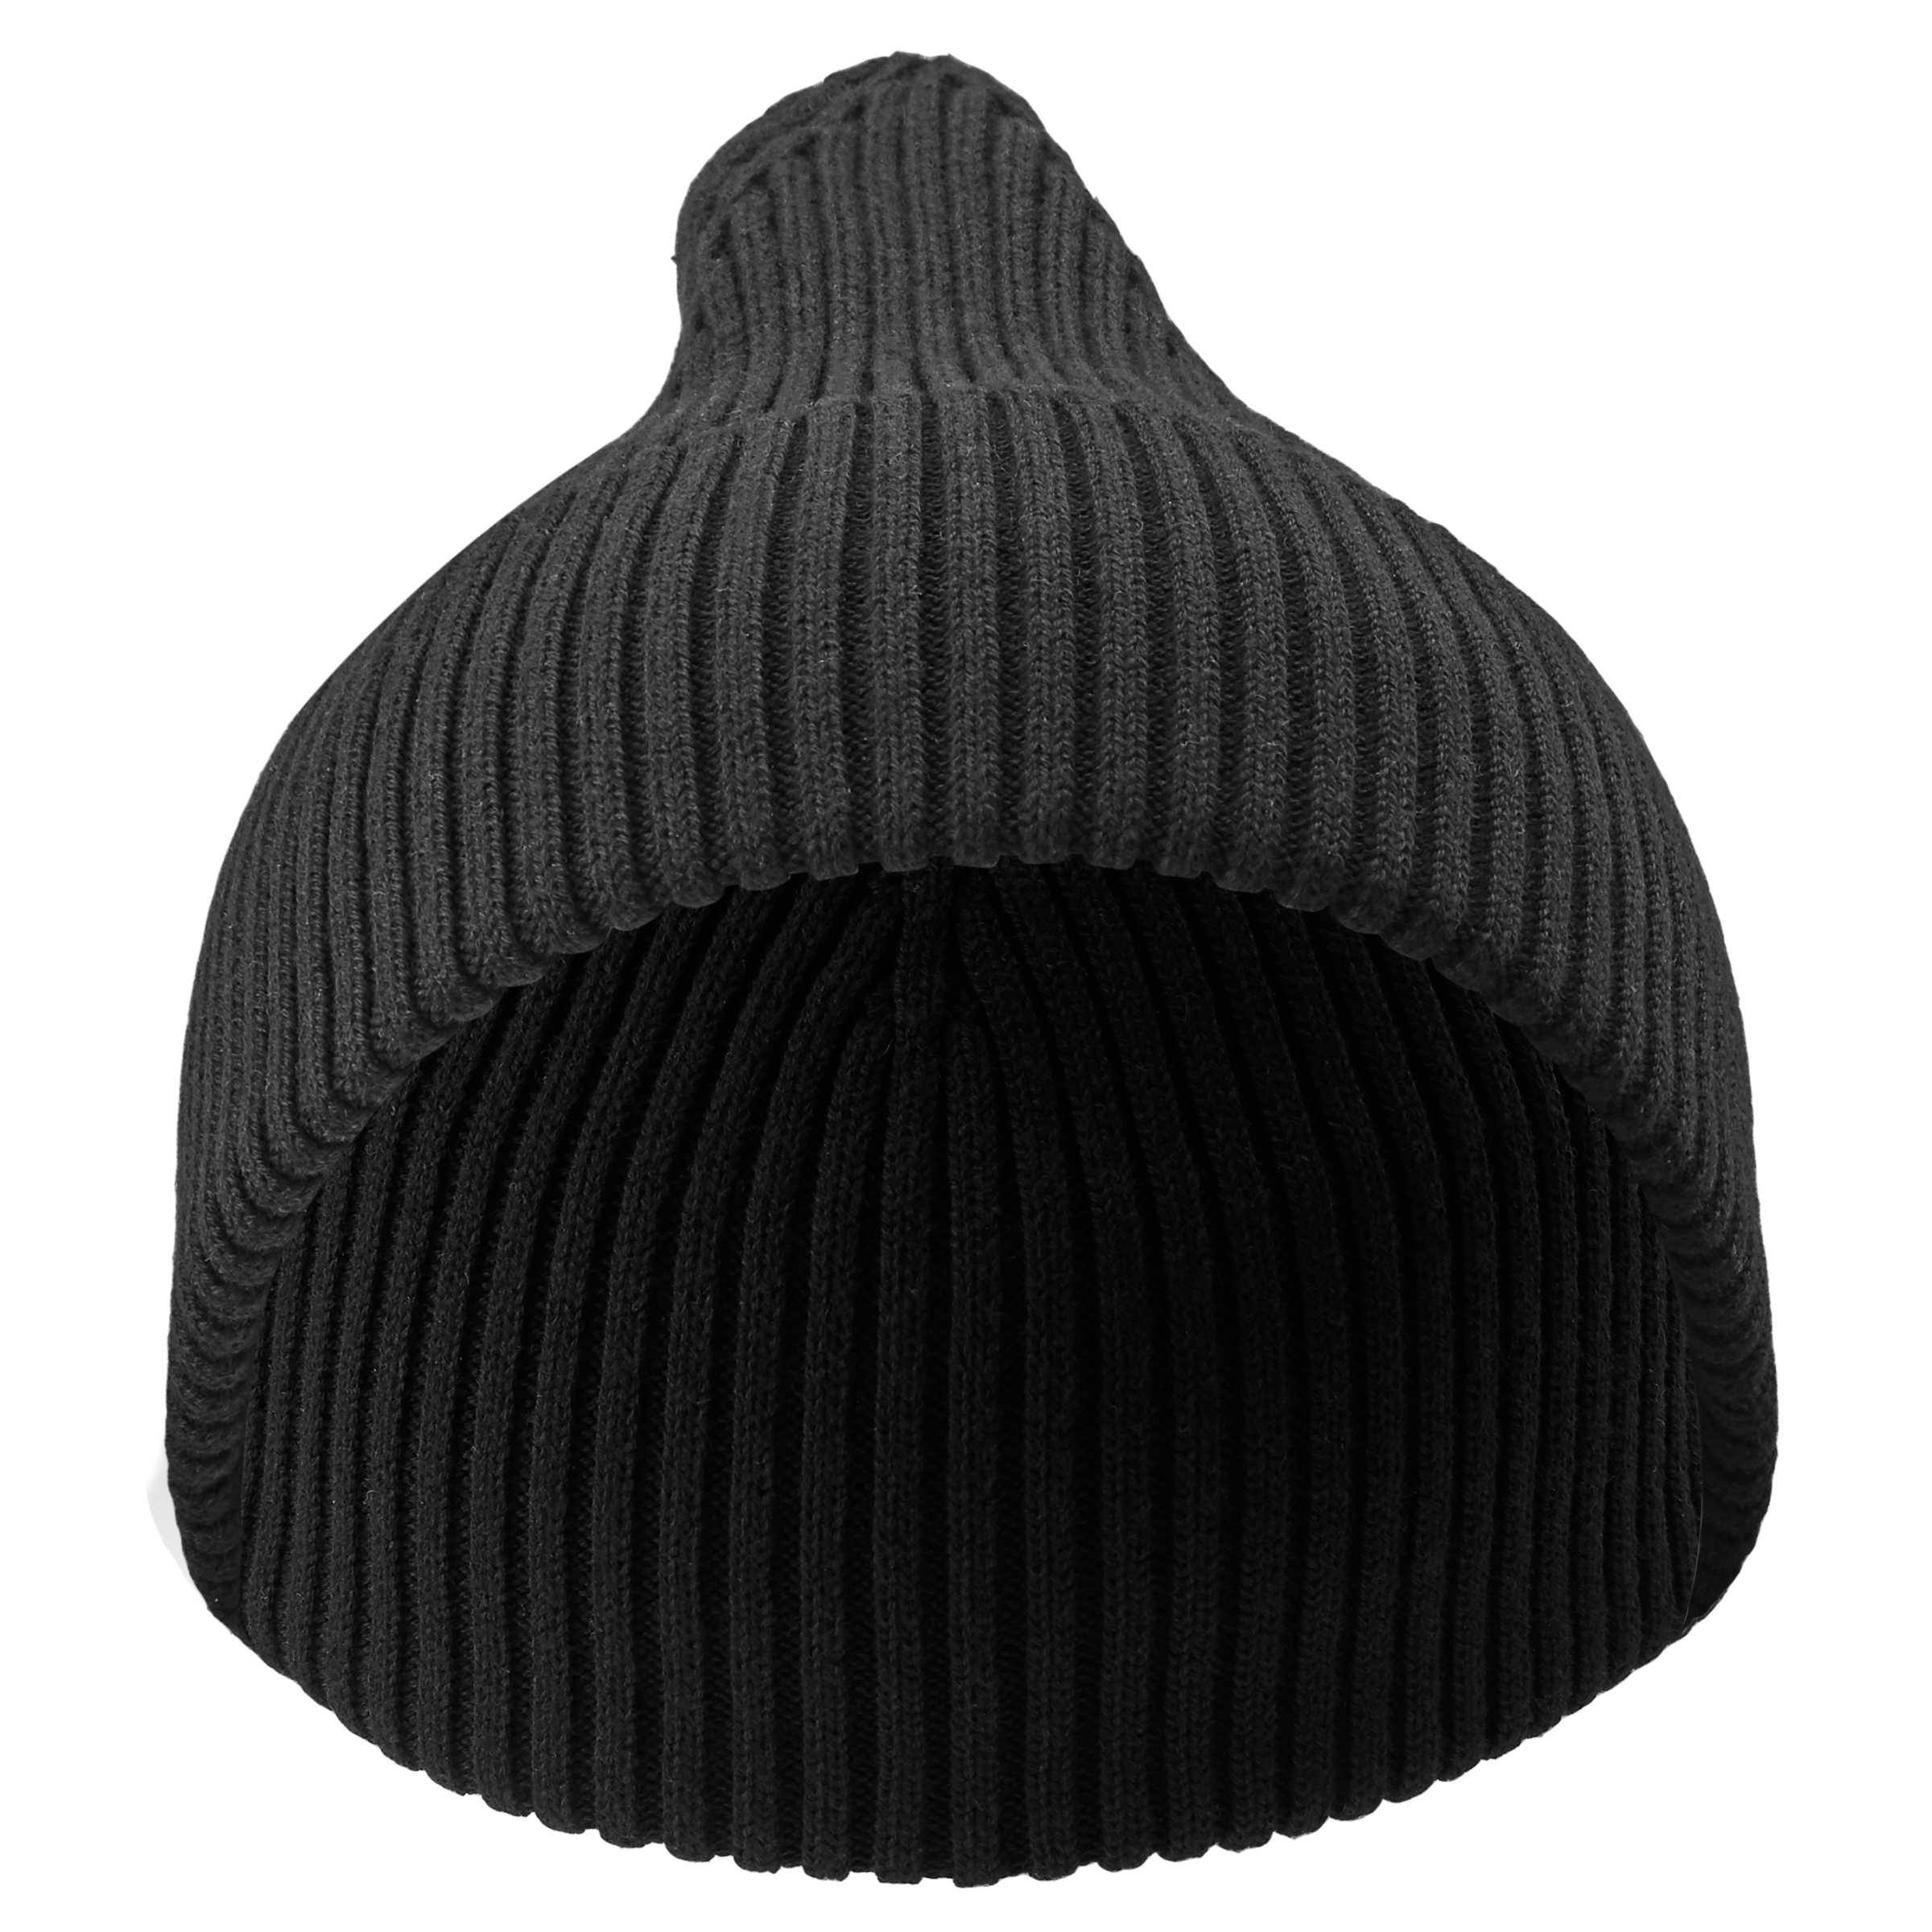 What is a beanie?, History and how to use